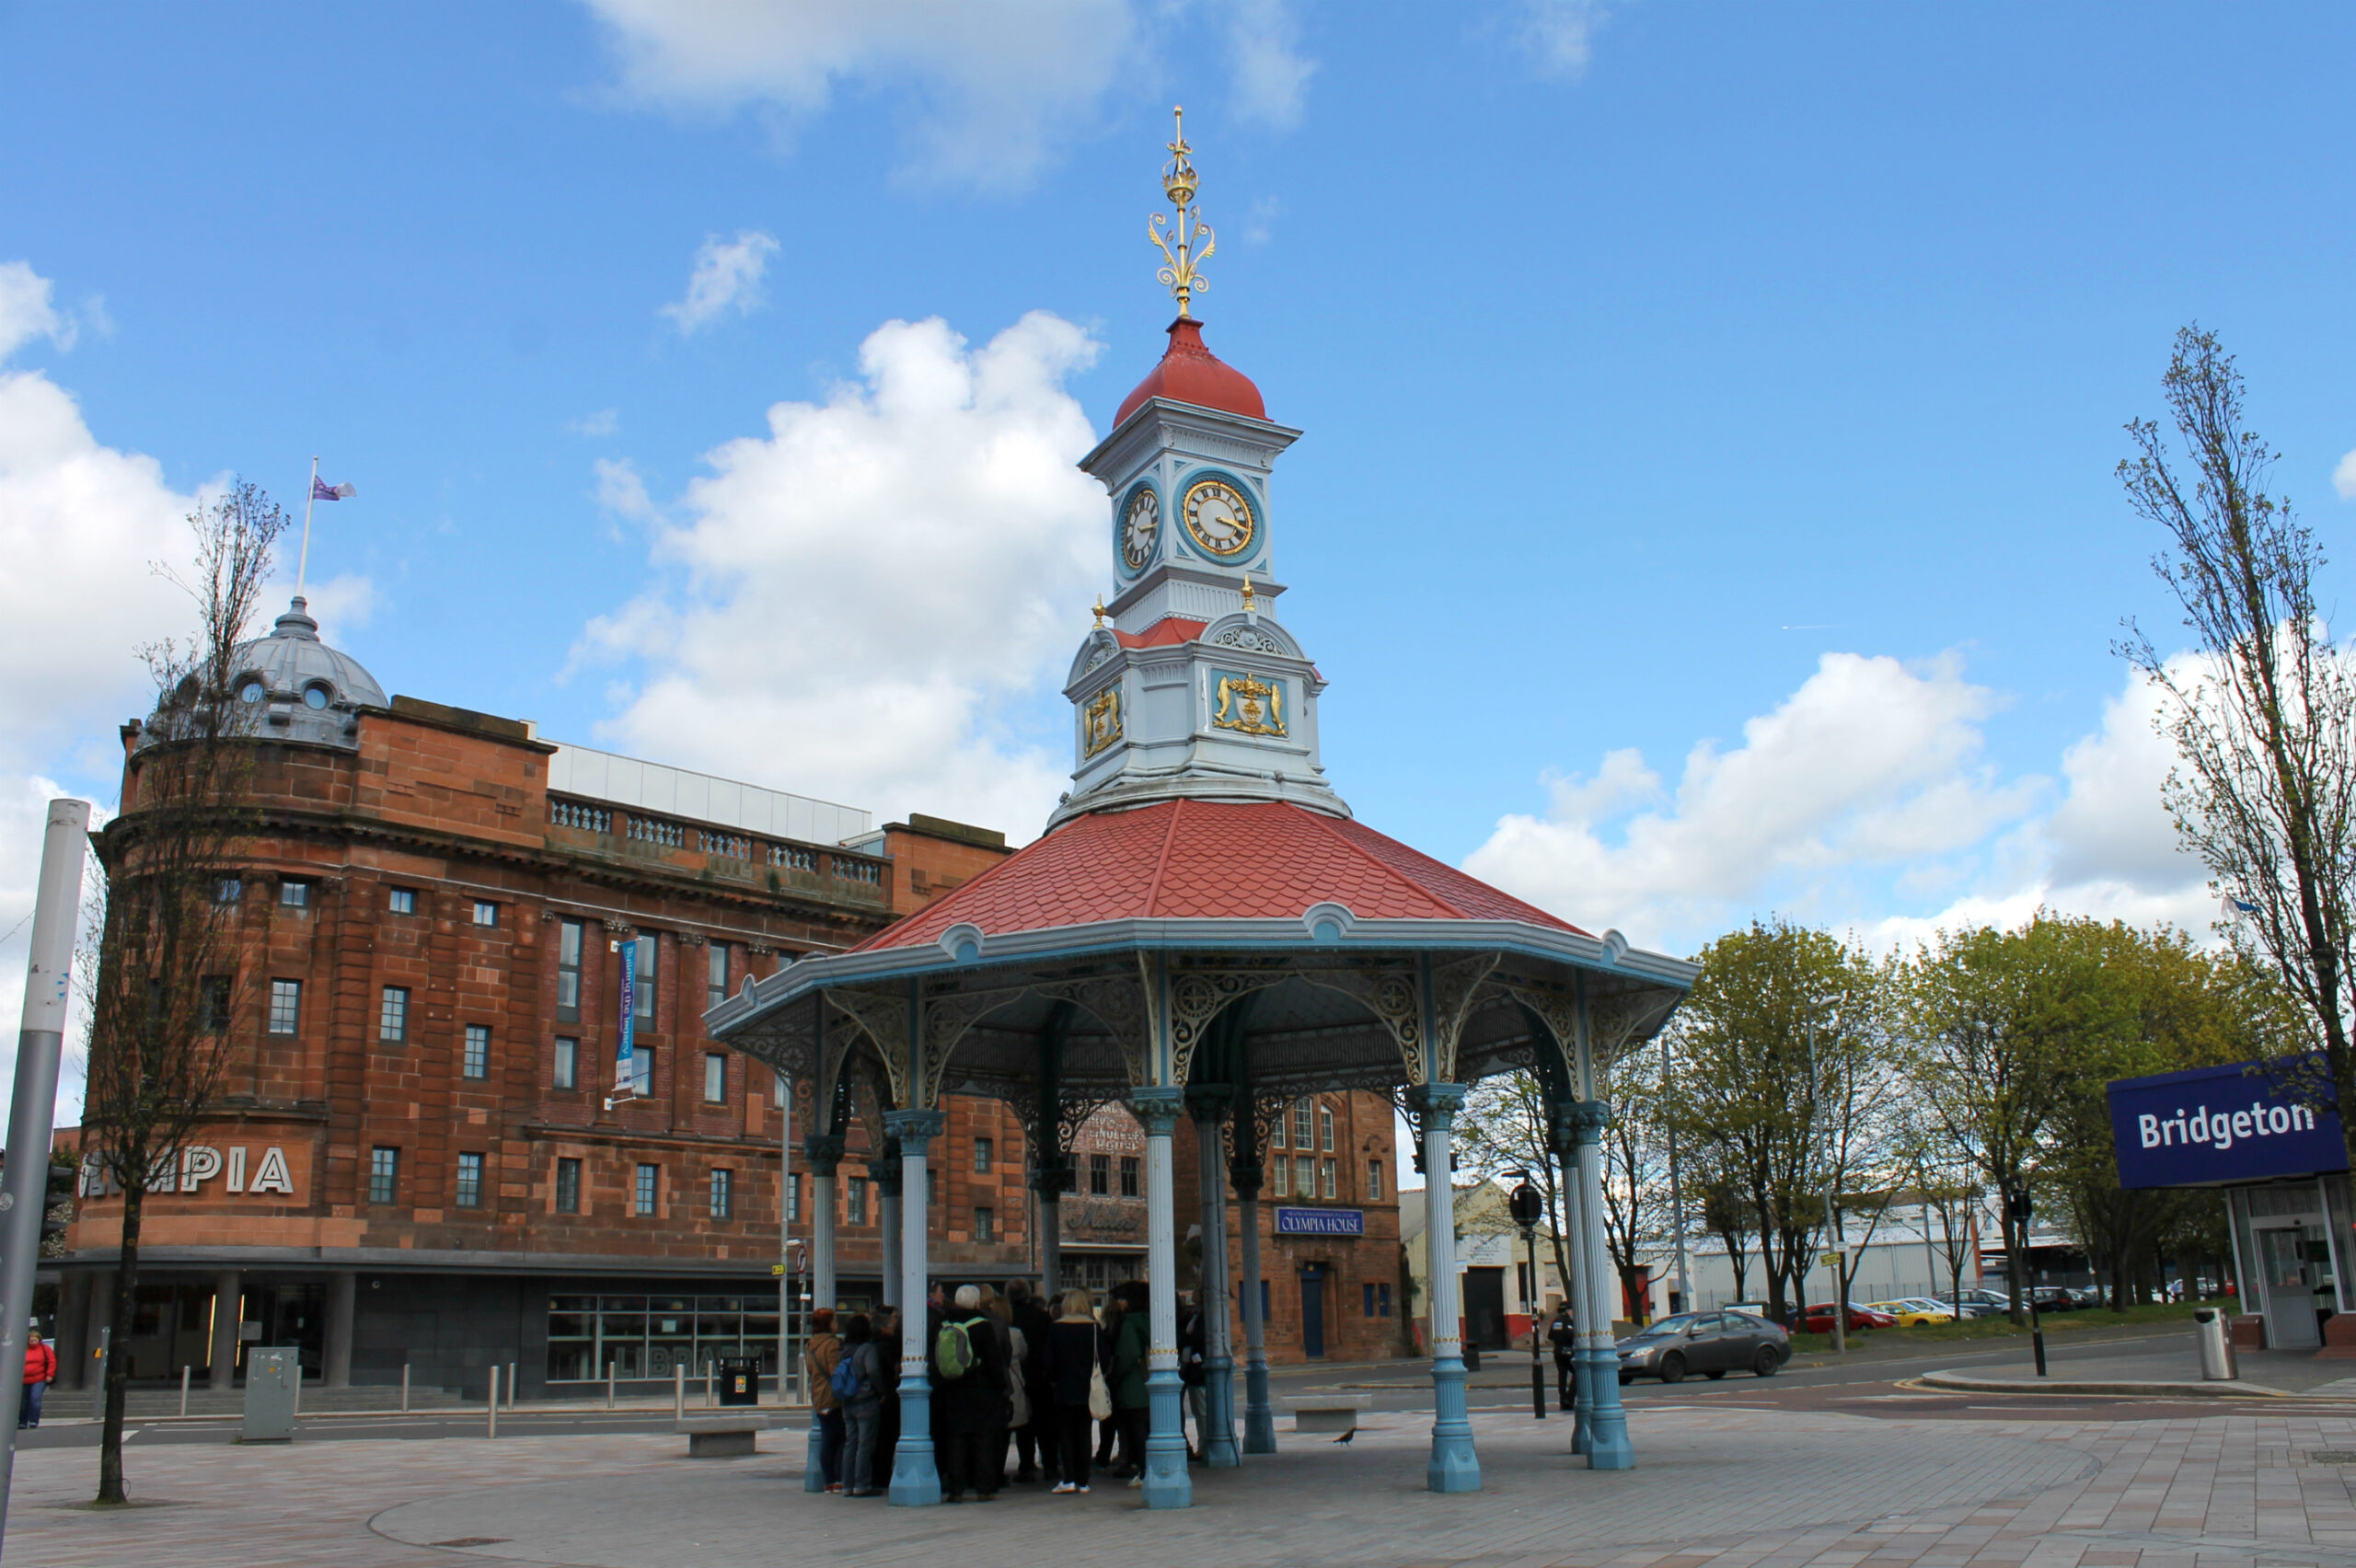 A group is standing under the Bridgeton Umbrella, an open shelter in the main square. The shelter is open on all side and has a red roof and blue structure.